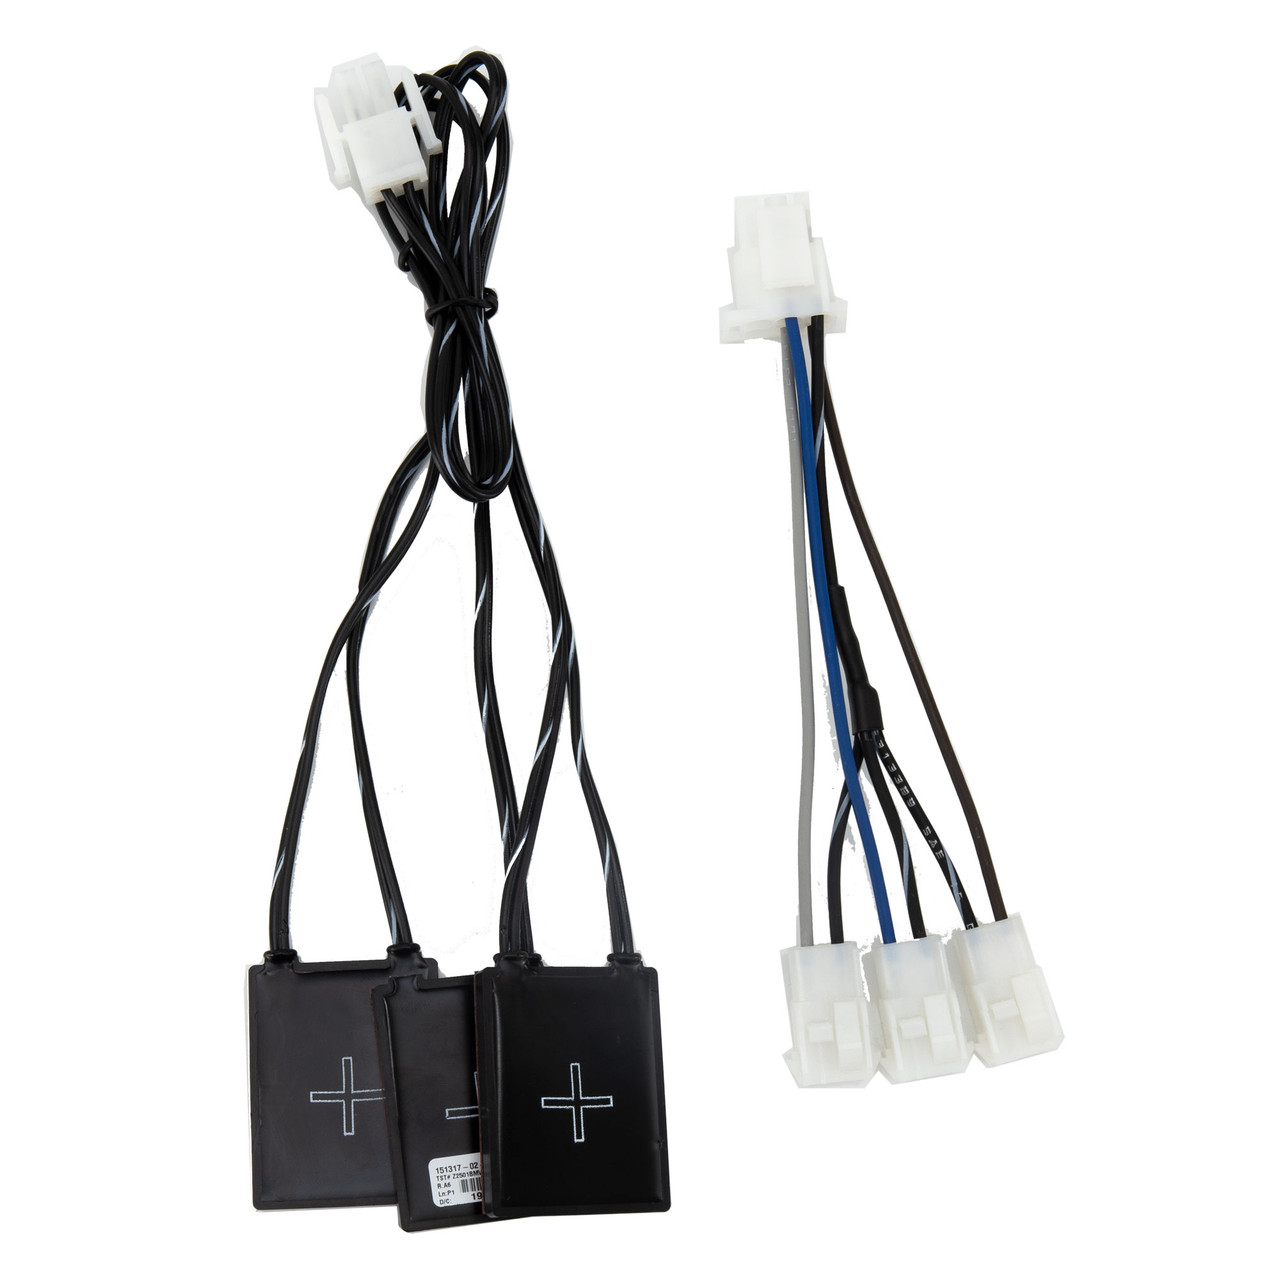 Automatic Electric RV Water Pipe Heating Cable Kit - RecPro